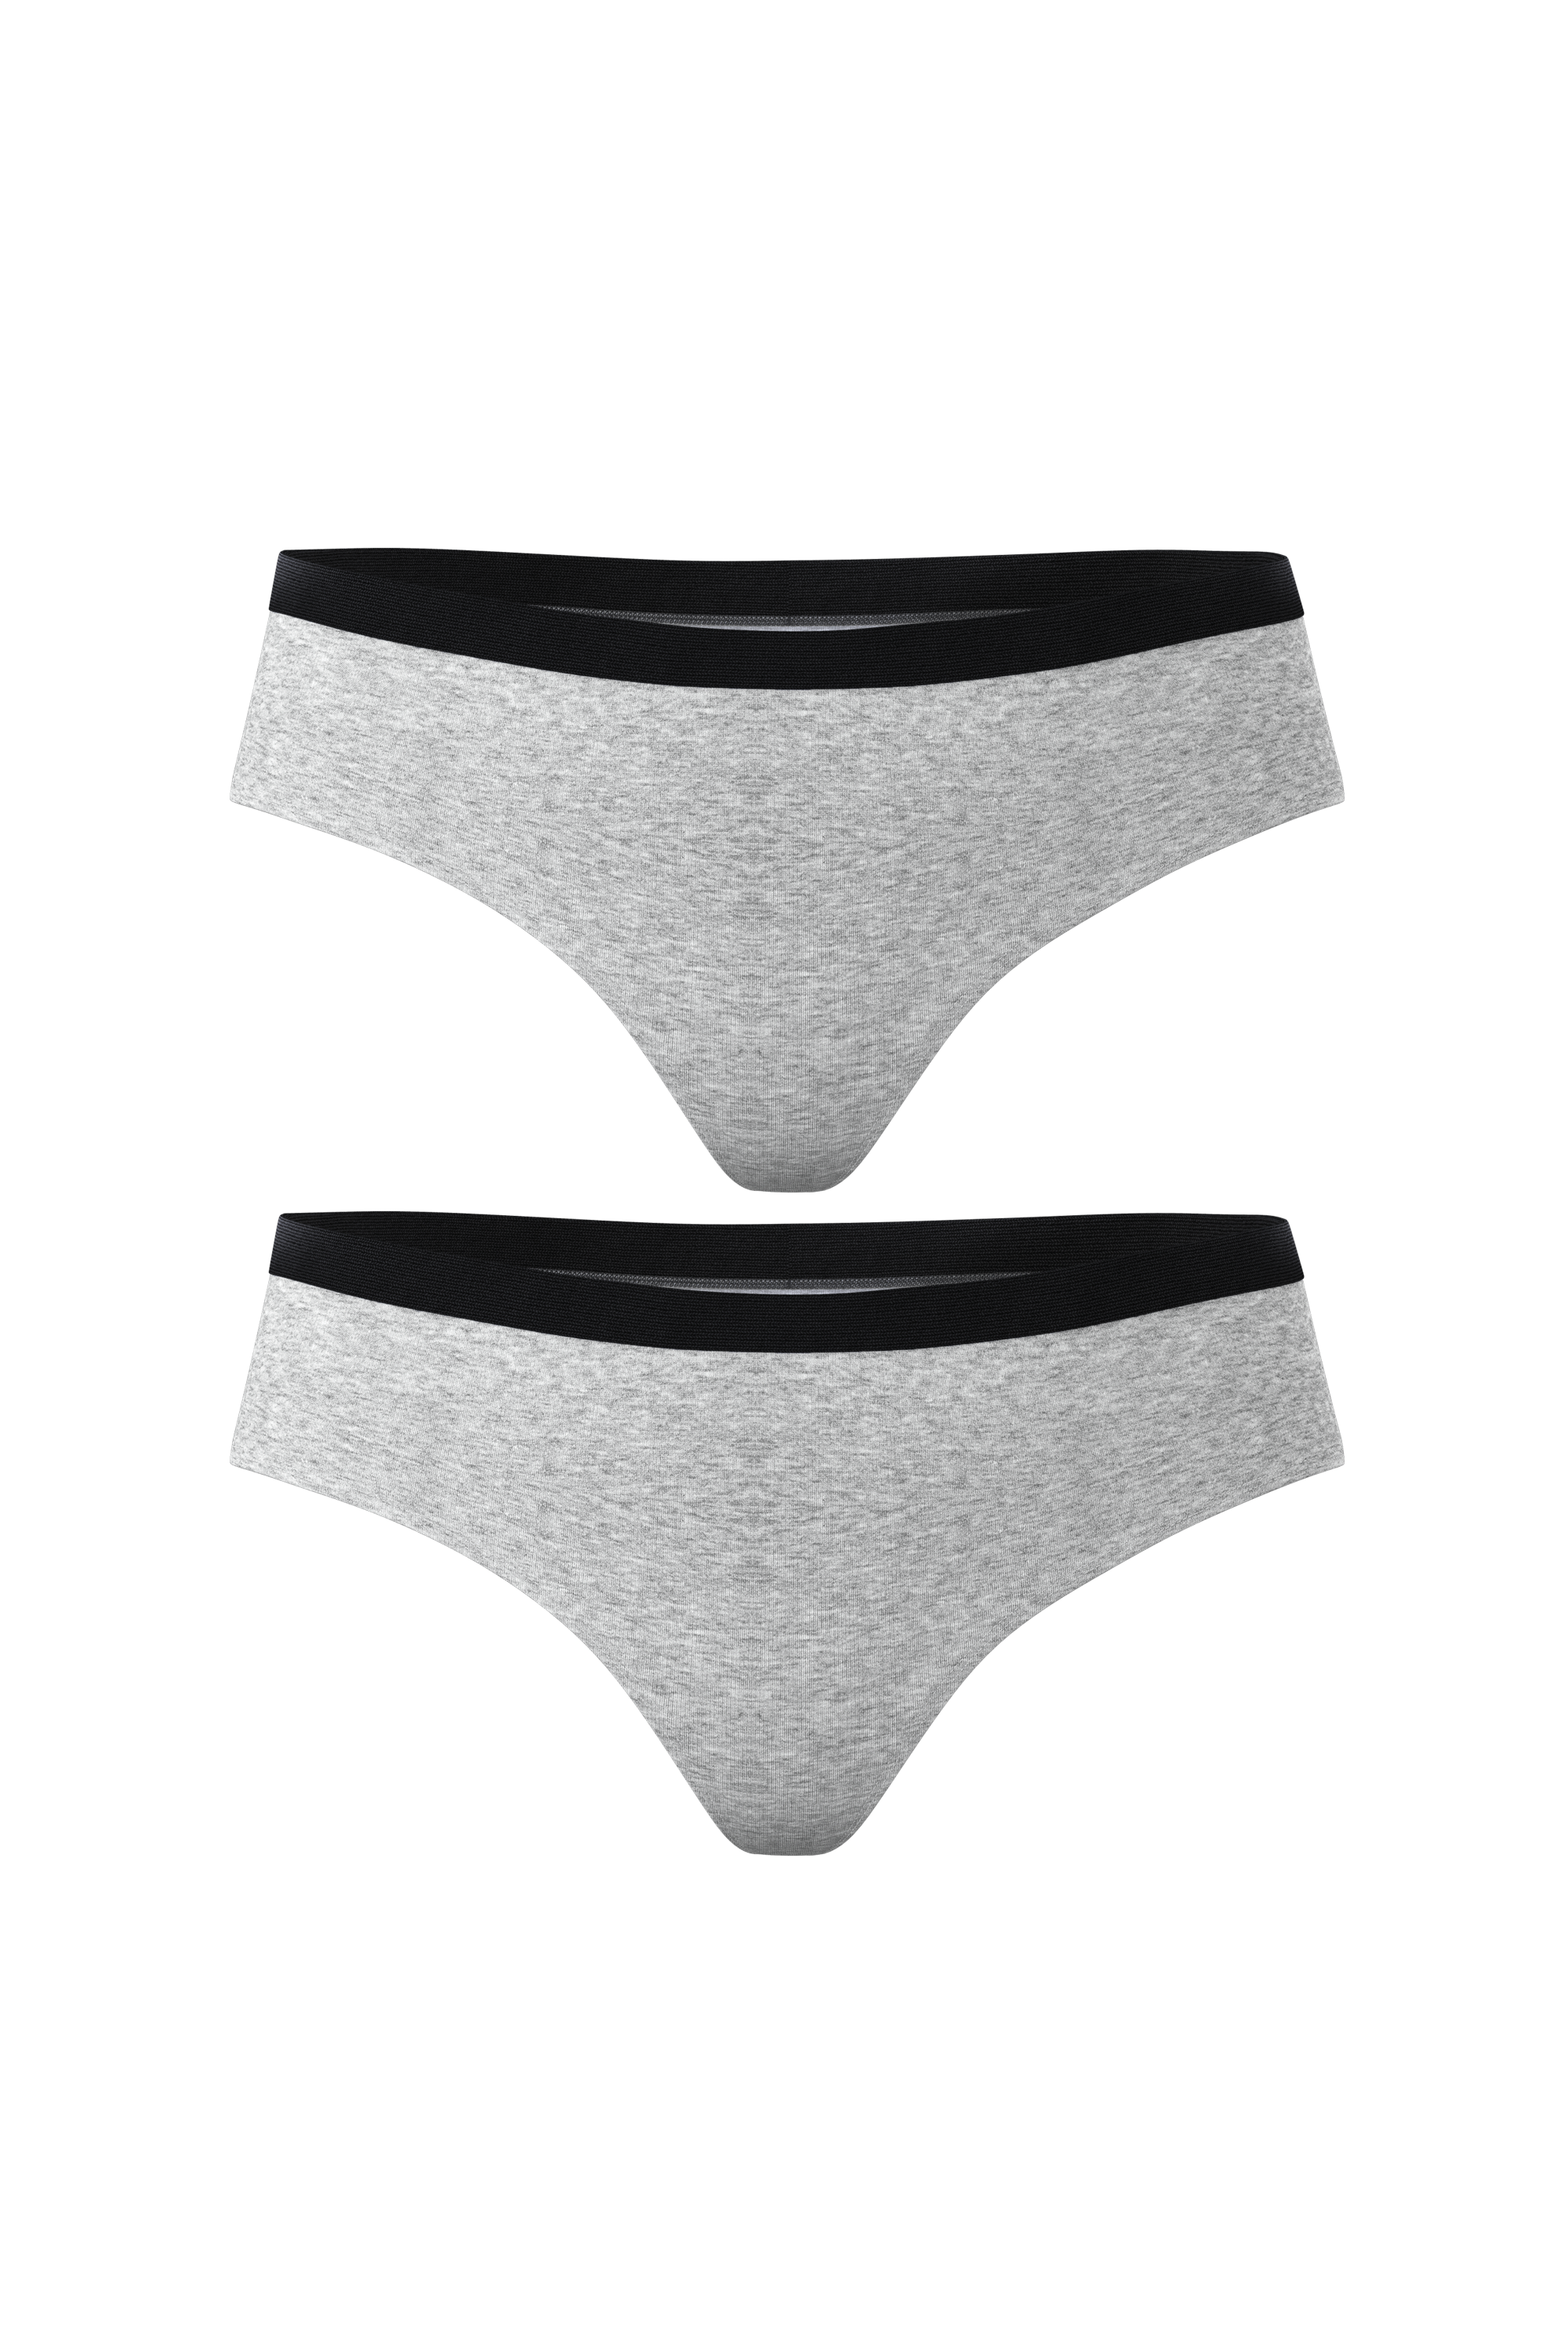 Shinesty - Get couples matching underwear and forget to put on pants  today. Shop matching styles here